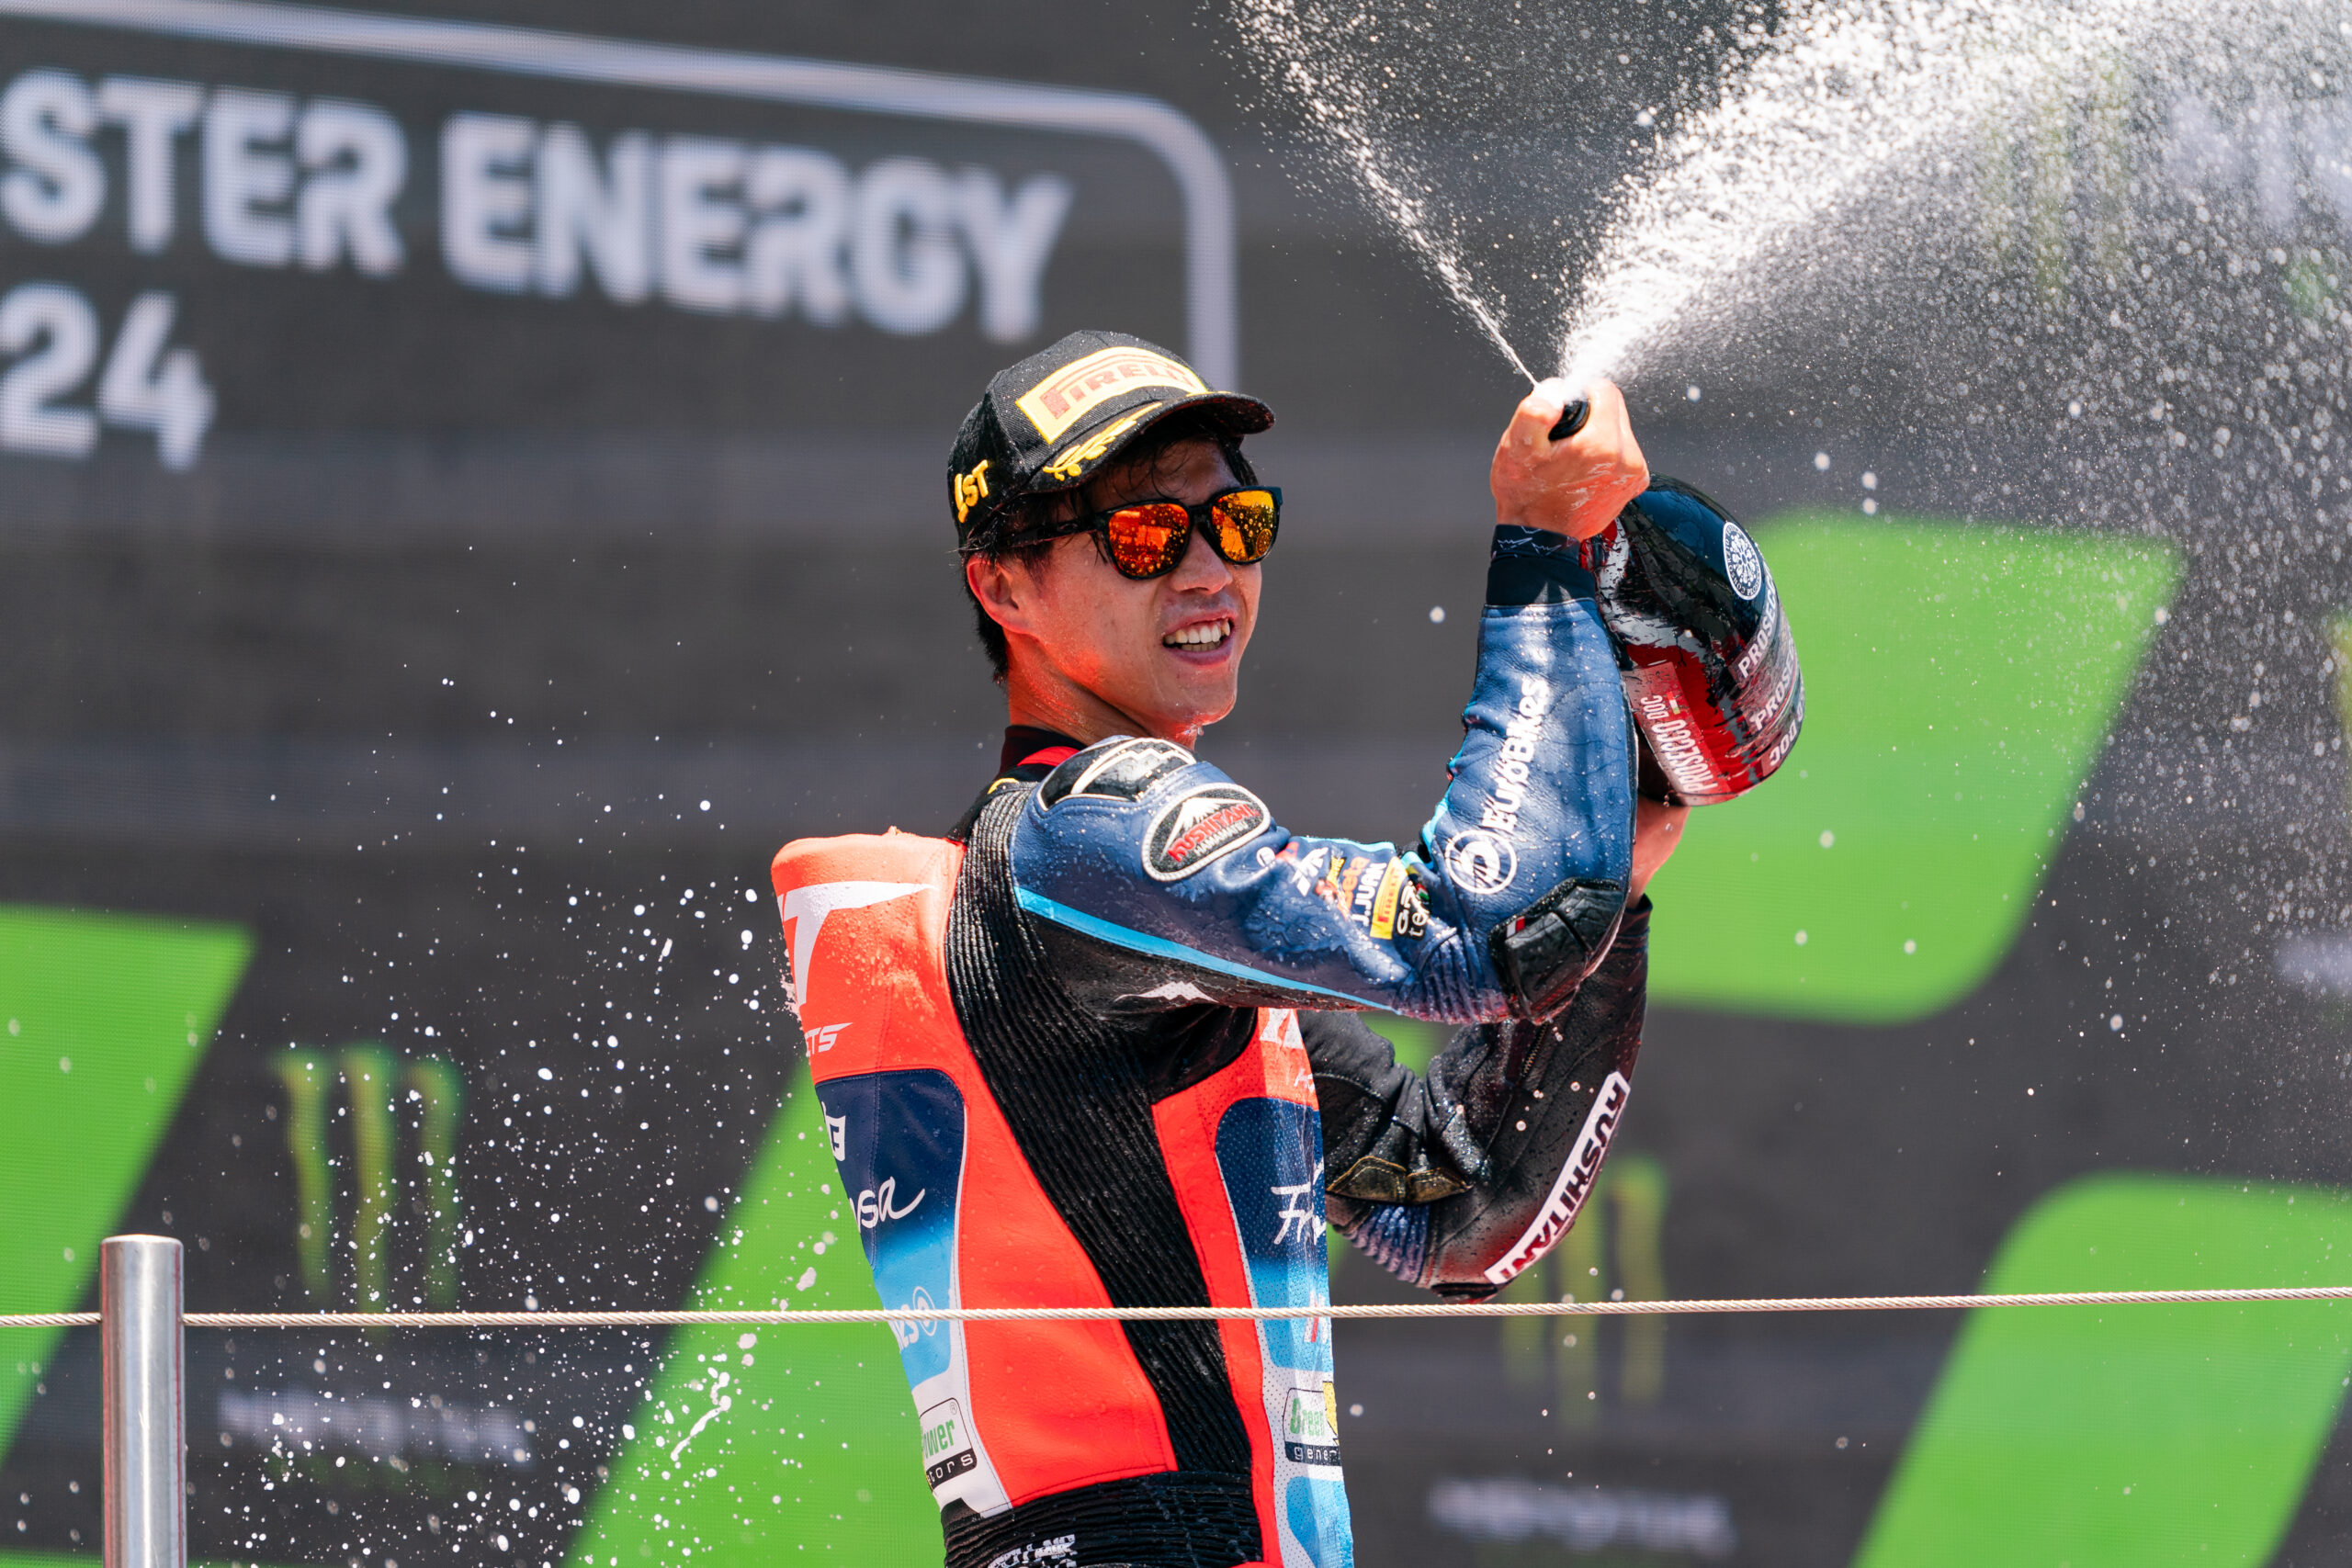 Featured image for “Moto2: Ai Ogura Takes his First Victory of the Season in Barcelona.”